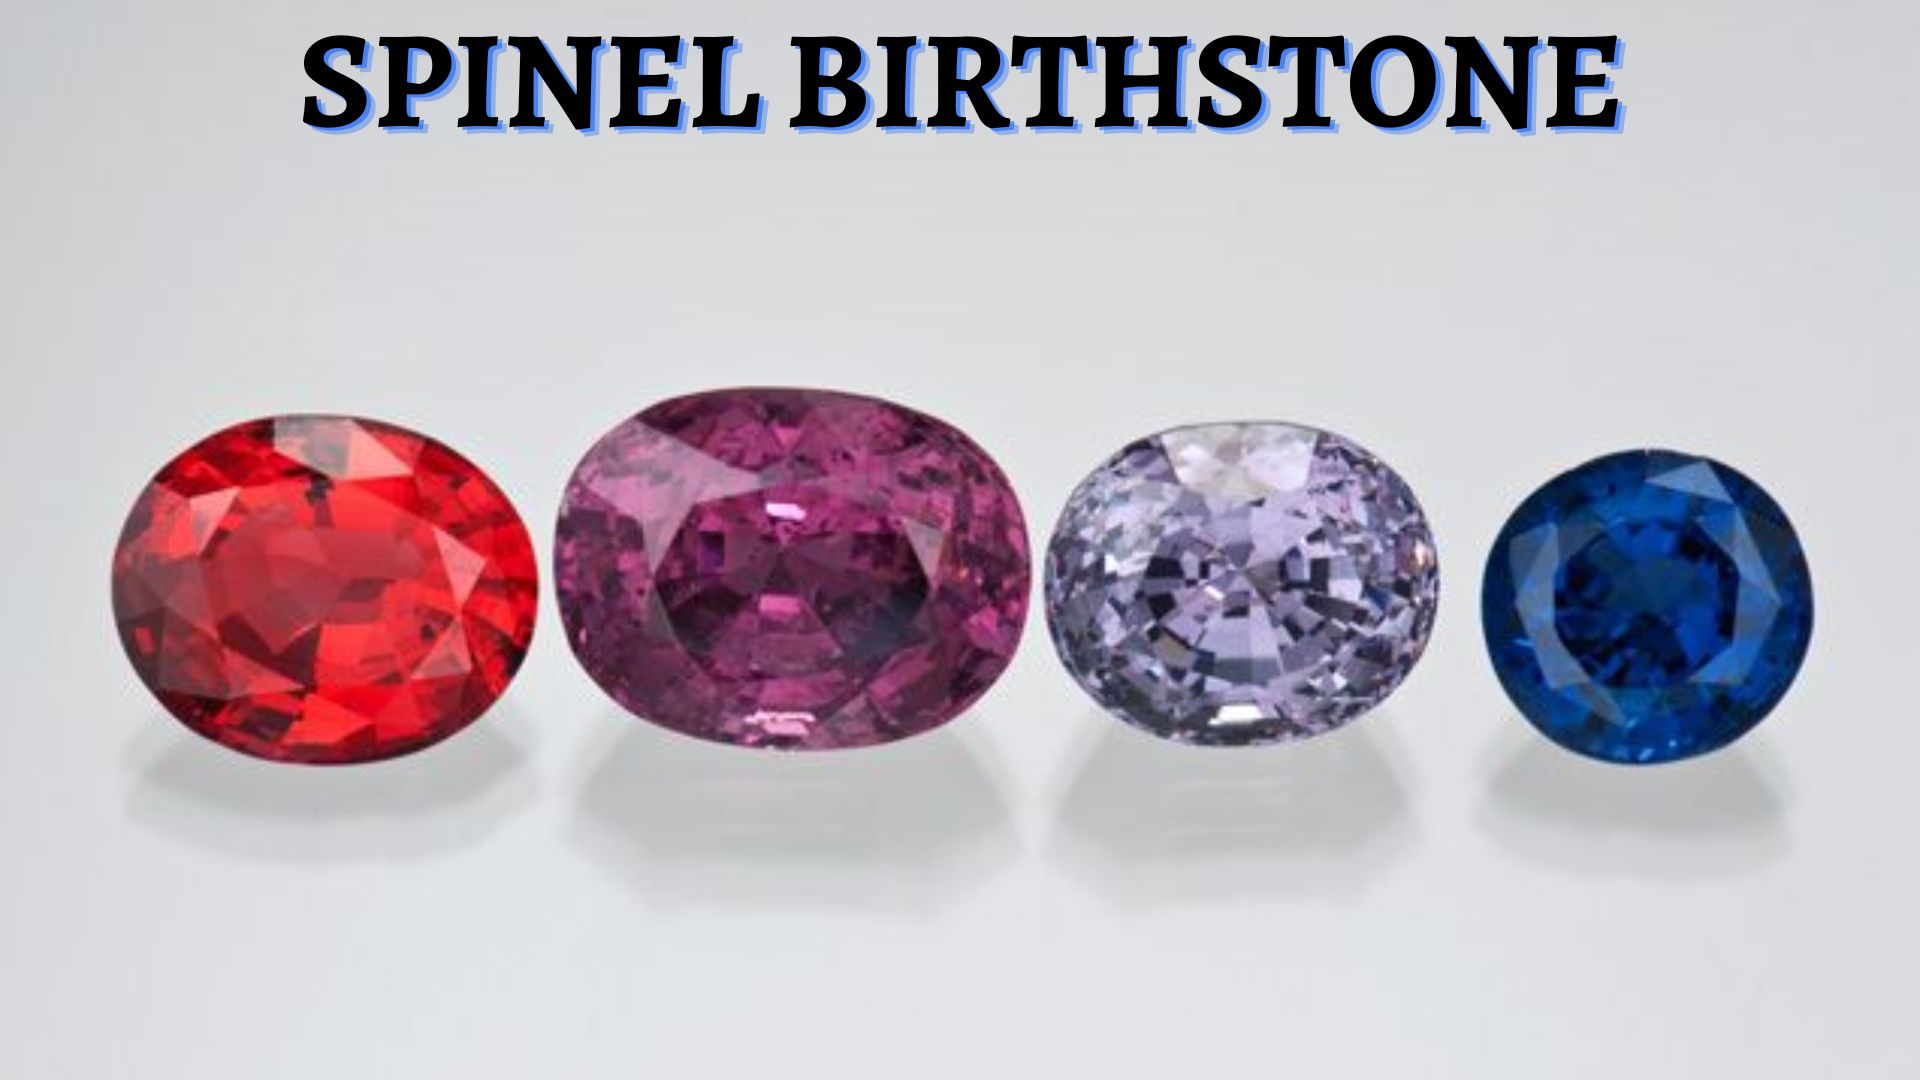 Spinel Birthstone - From Ancient Times To Modern Jewelry